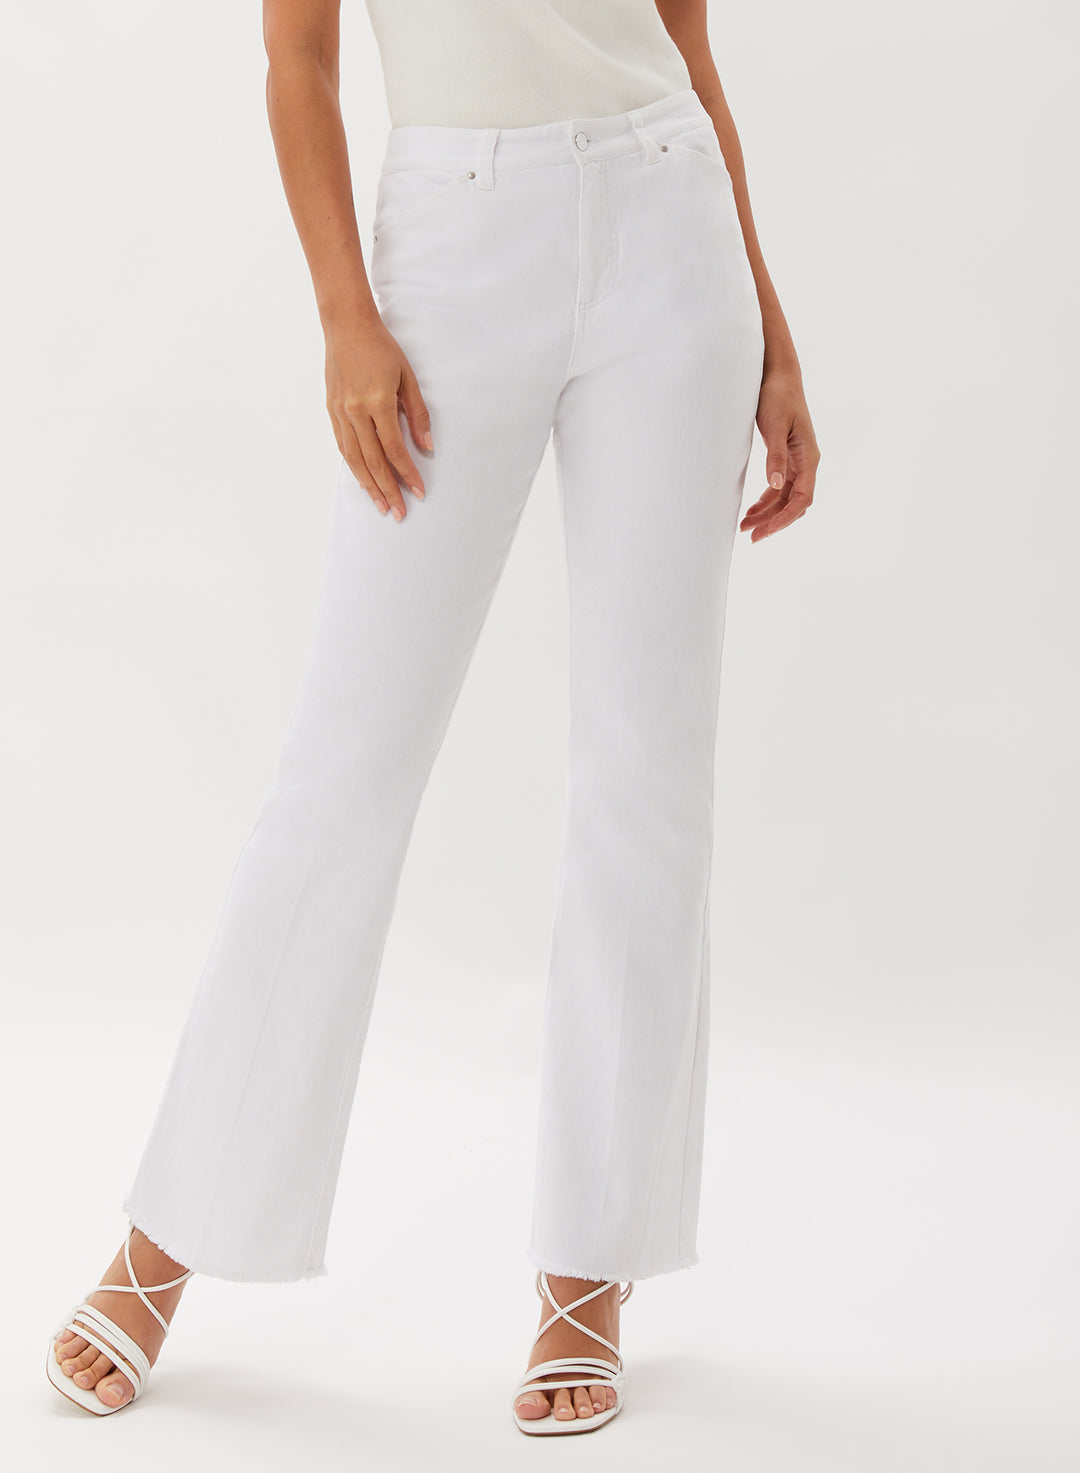 Hollywood Bootcut Jean With Raw Hem - White